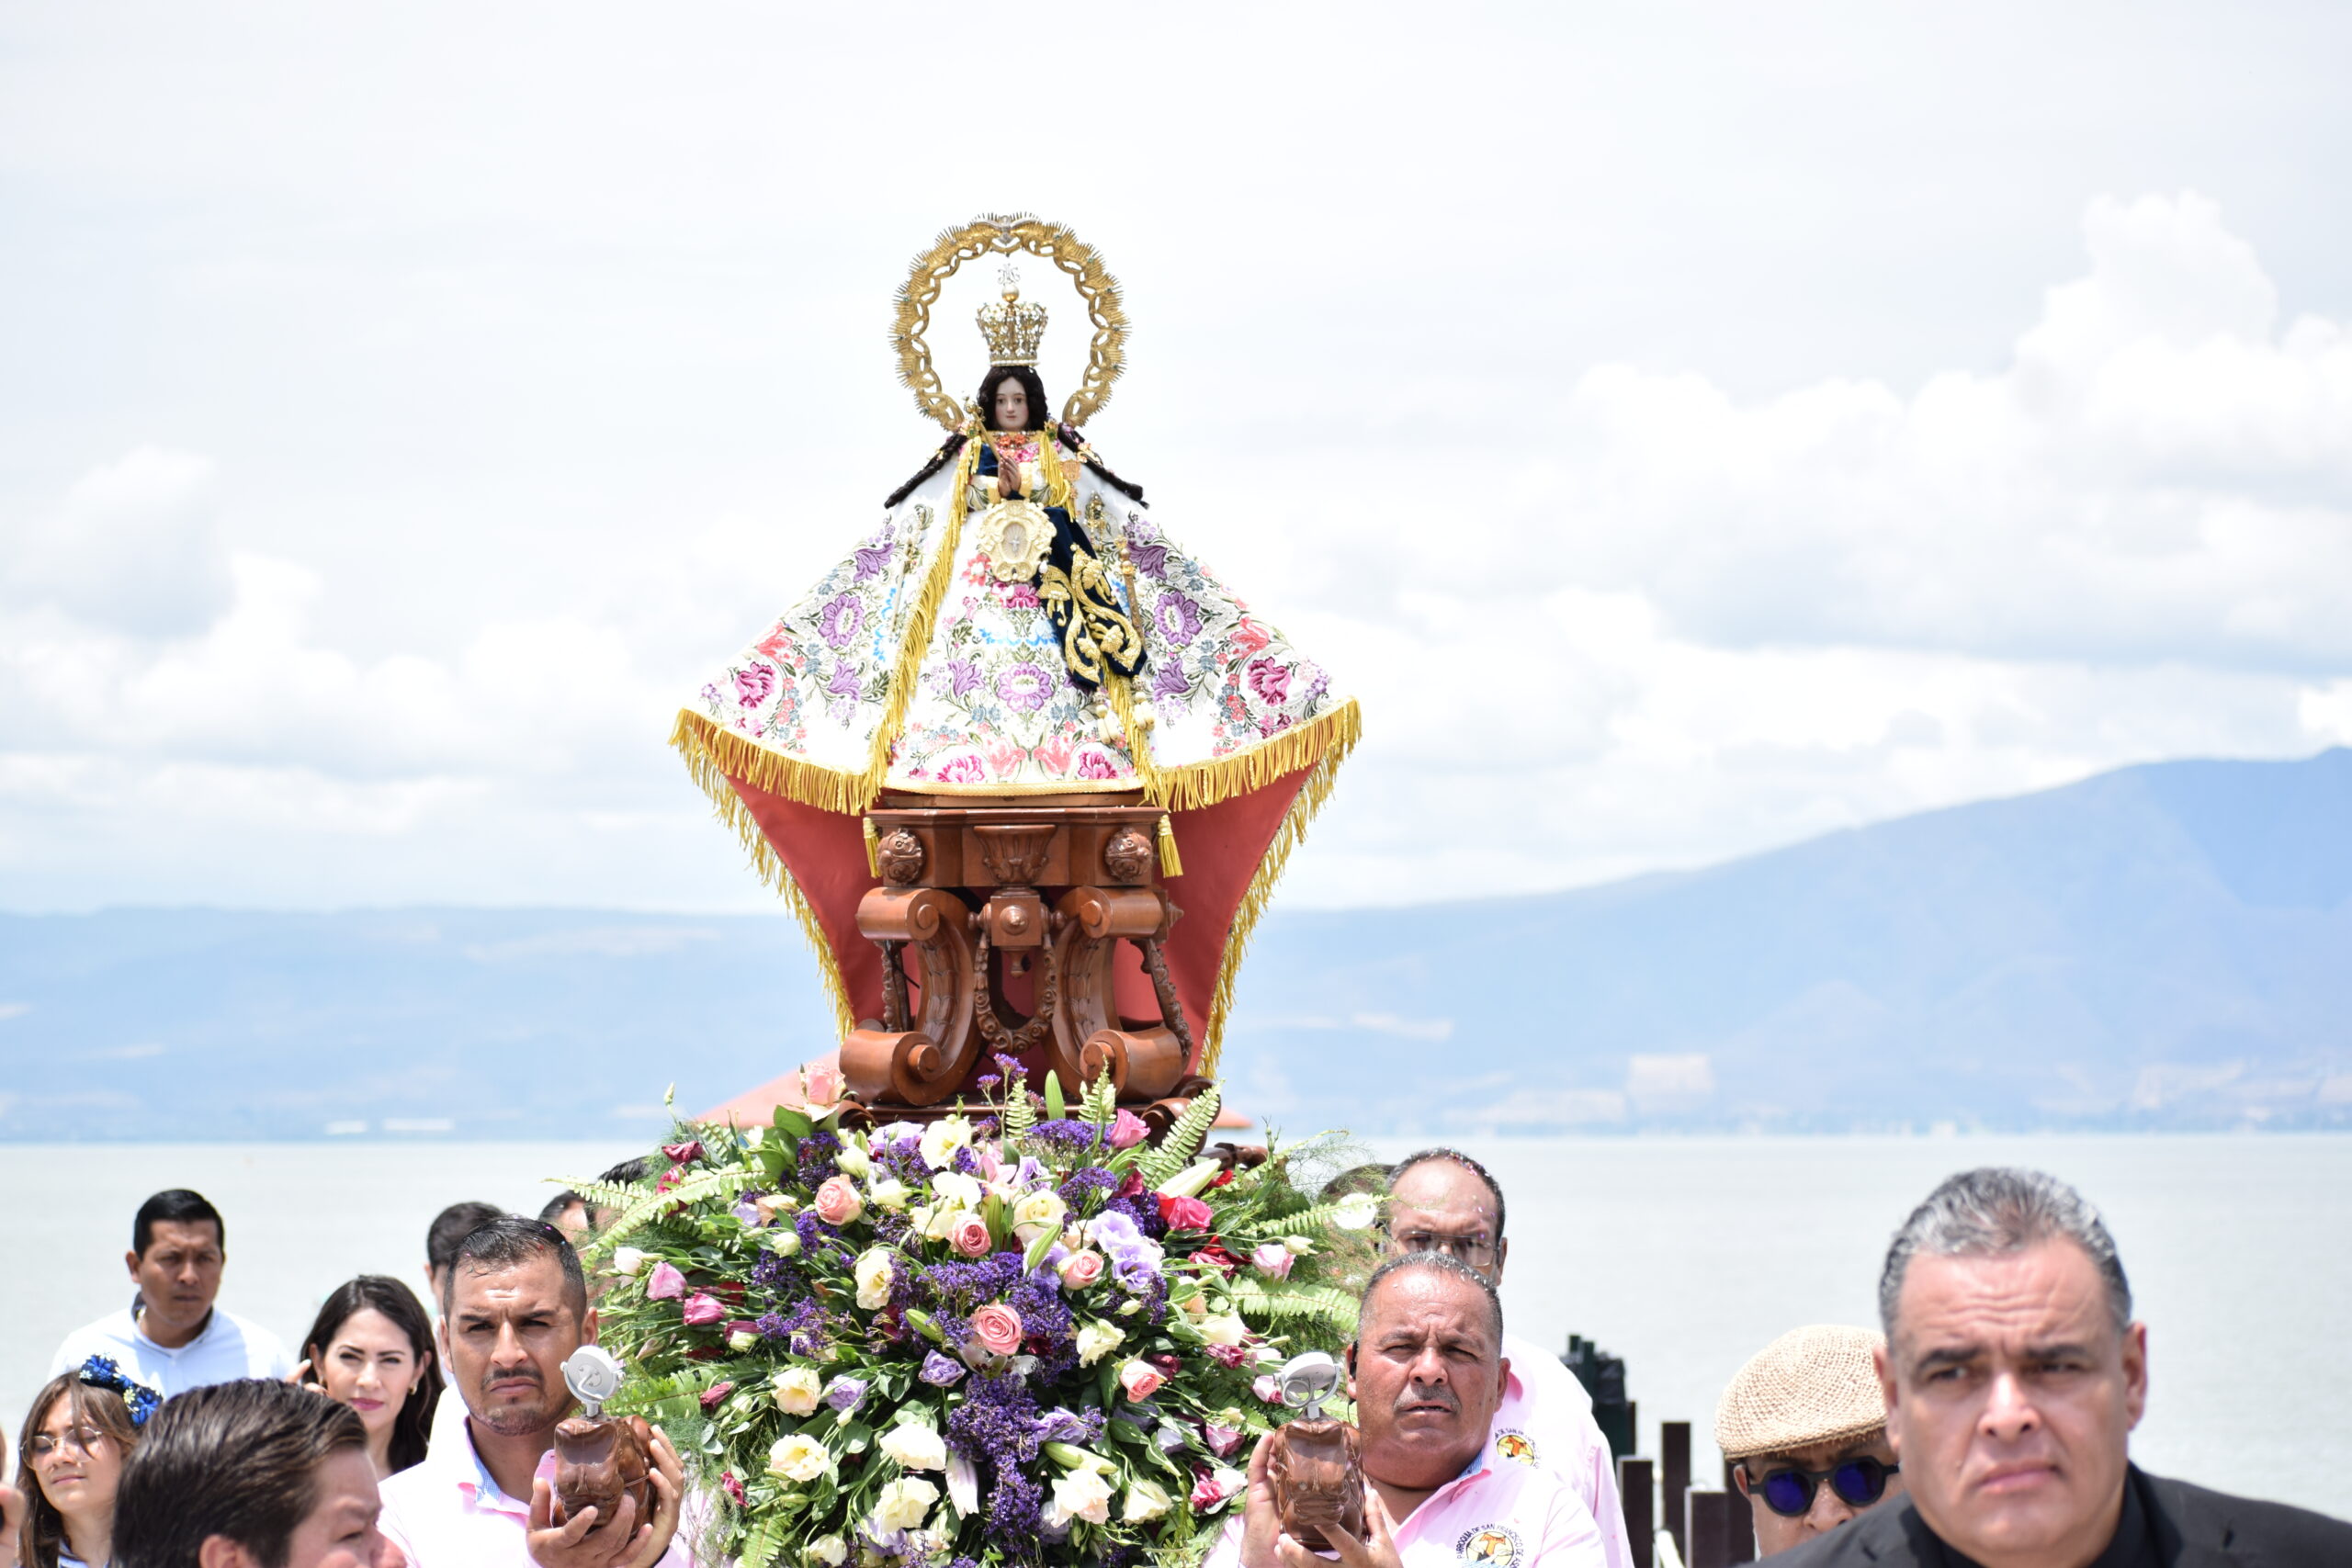 Chapala residents await Queen of the Lake hoping for rain